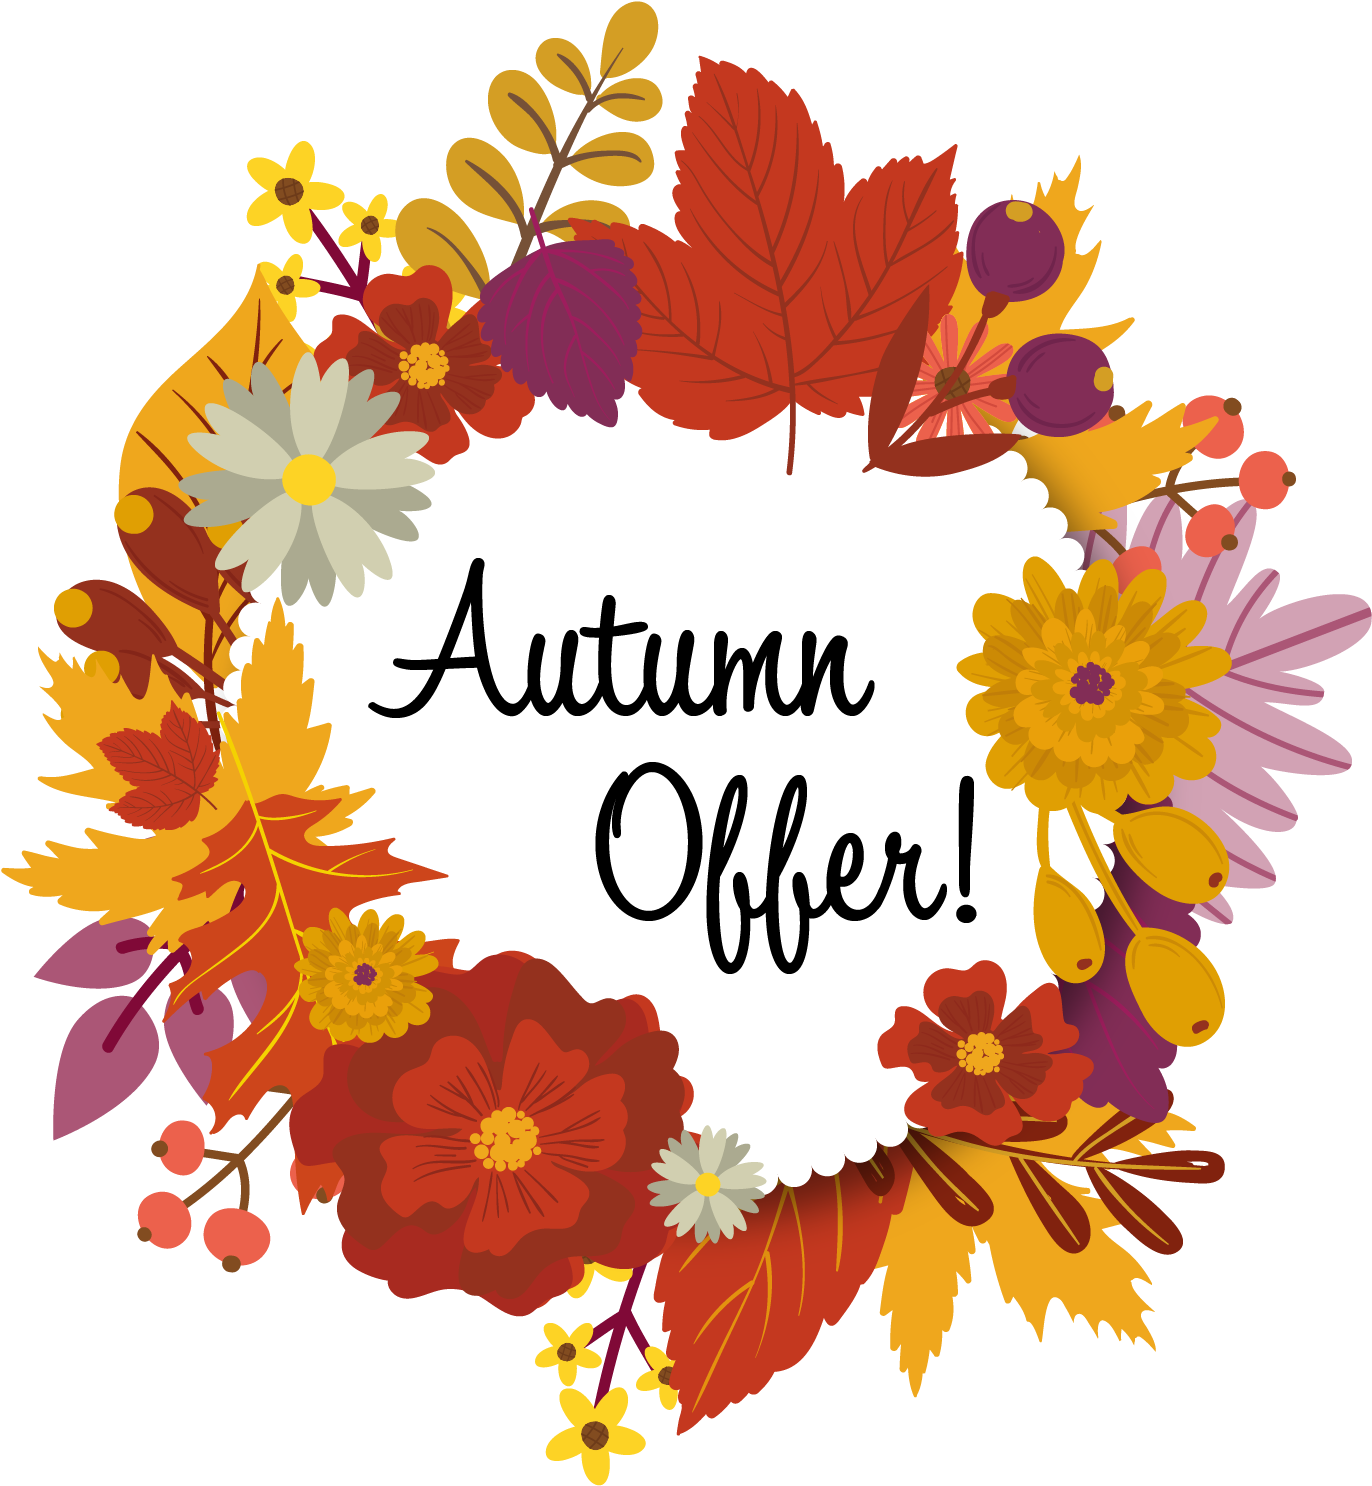 Autumn Offer Floral Wreath PNG image